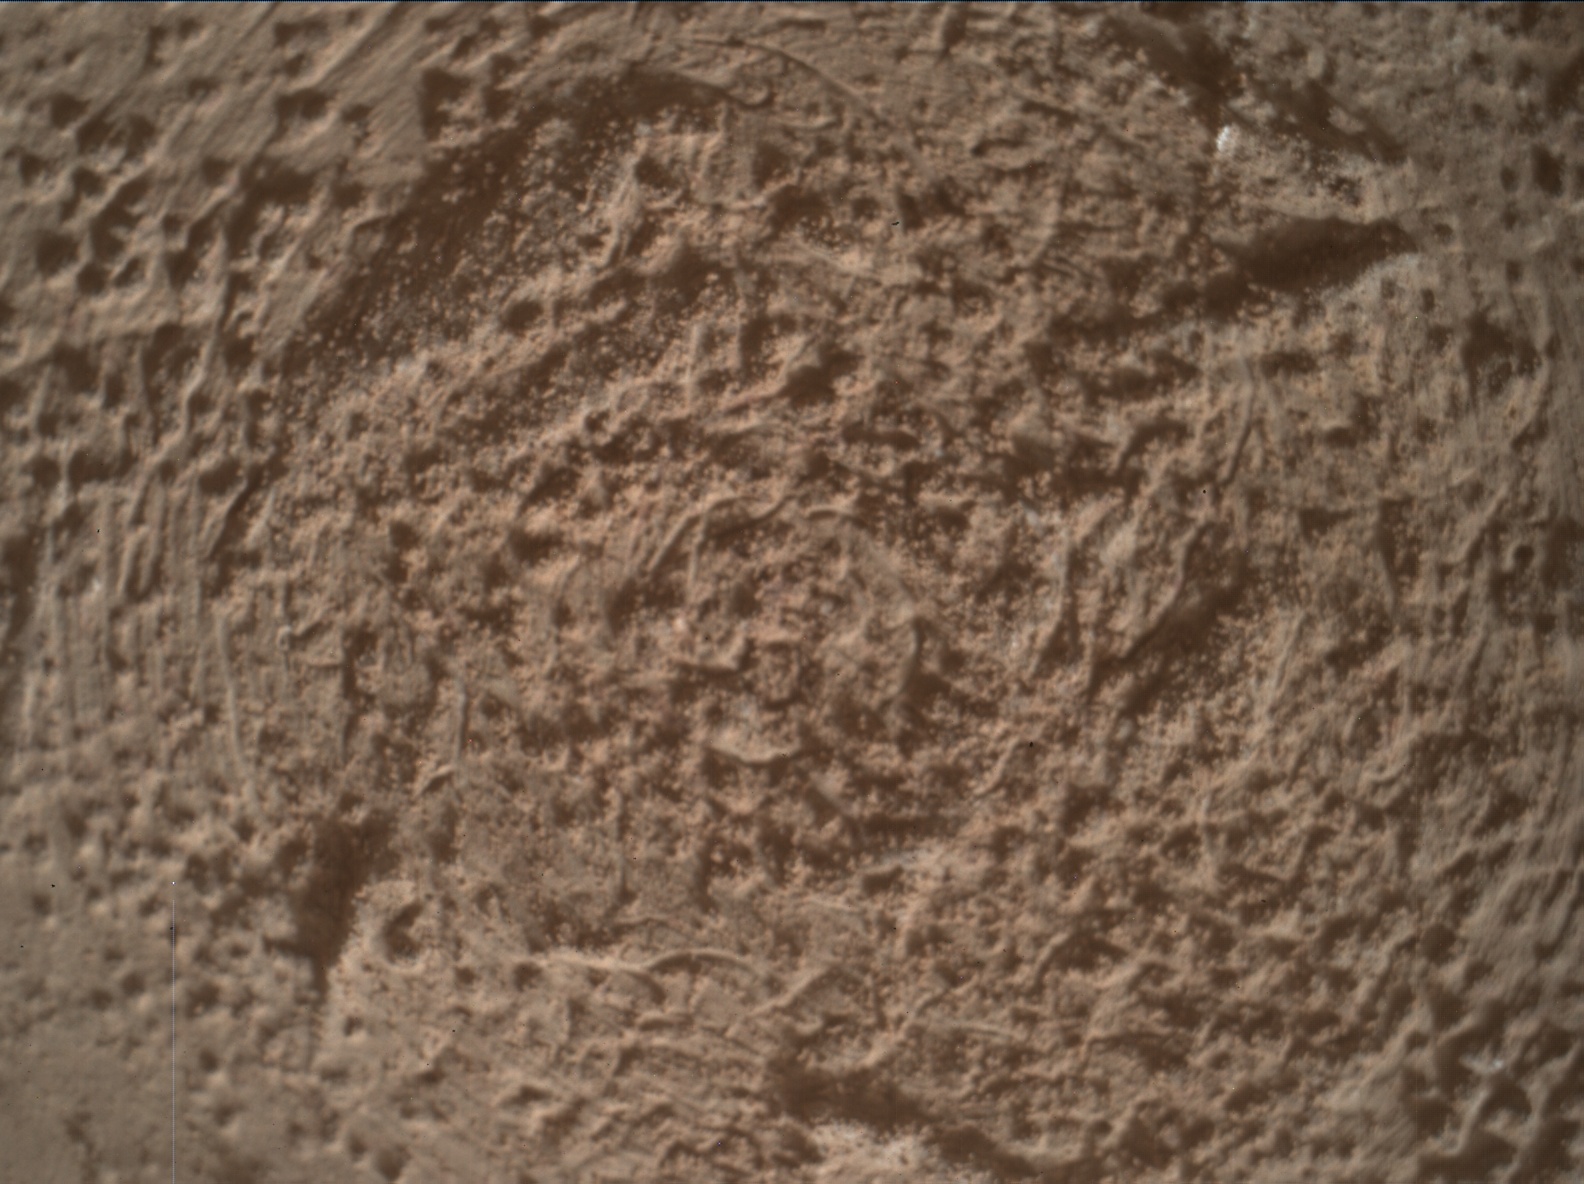 Nasa's Mars rover Curiosity acquired this image using its Mars Hand Lens Imager (MAHLI) on Sol 3385